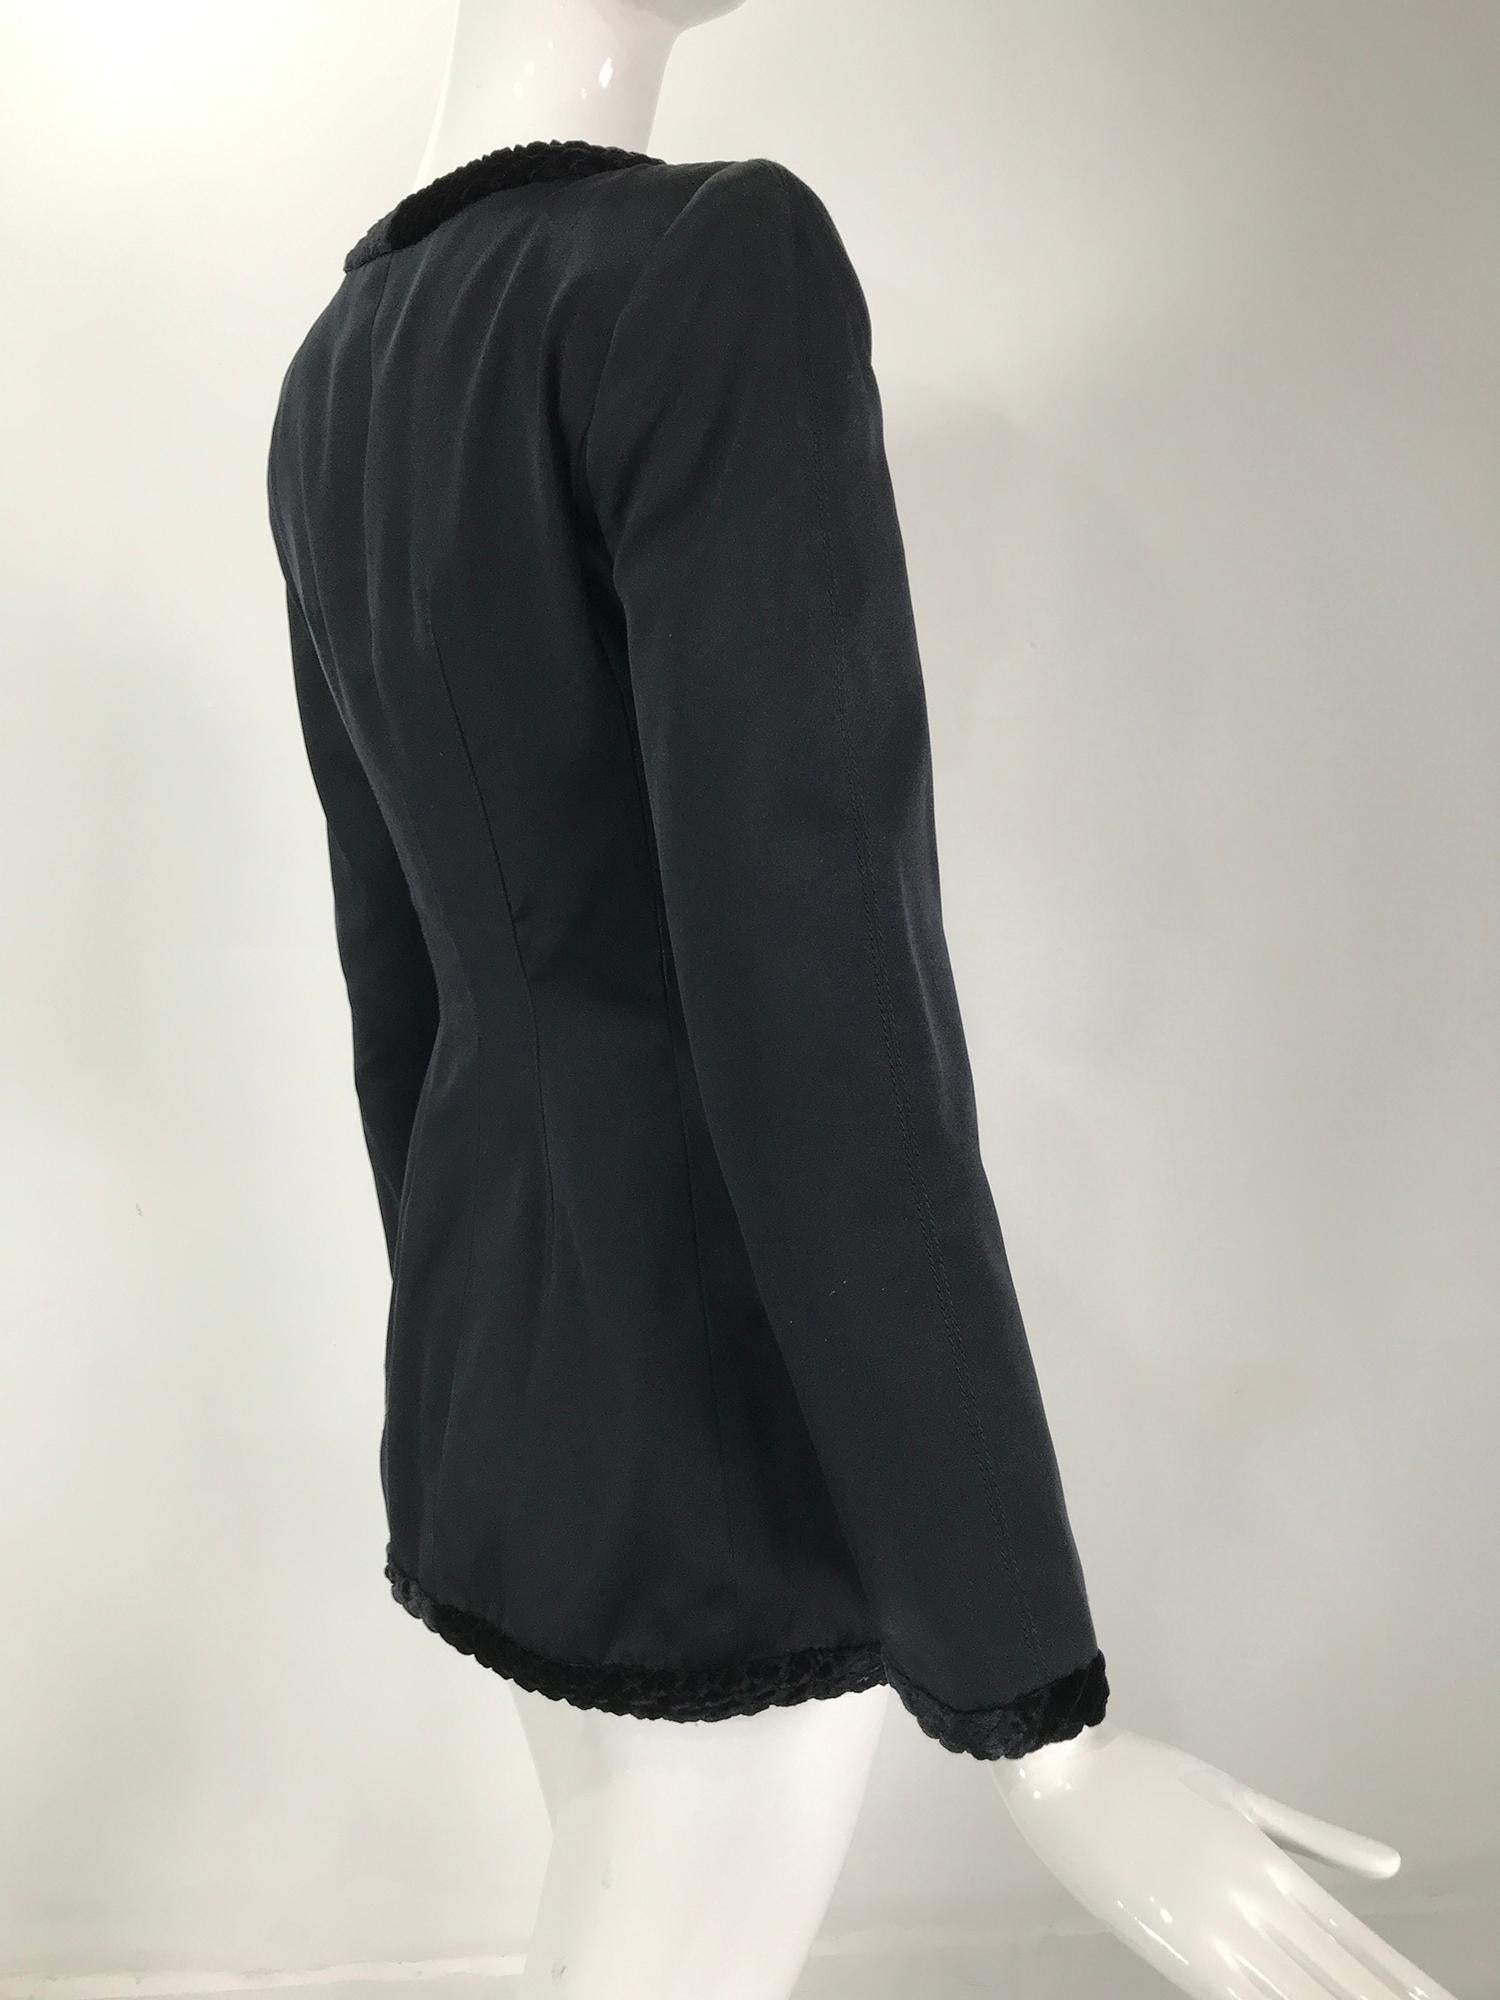 Valentino Black Silk Fitted Jewel Button Evening Jacket 1990s For Sale 4